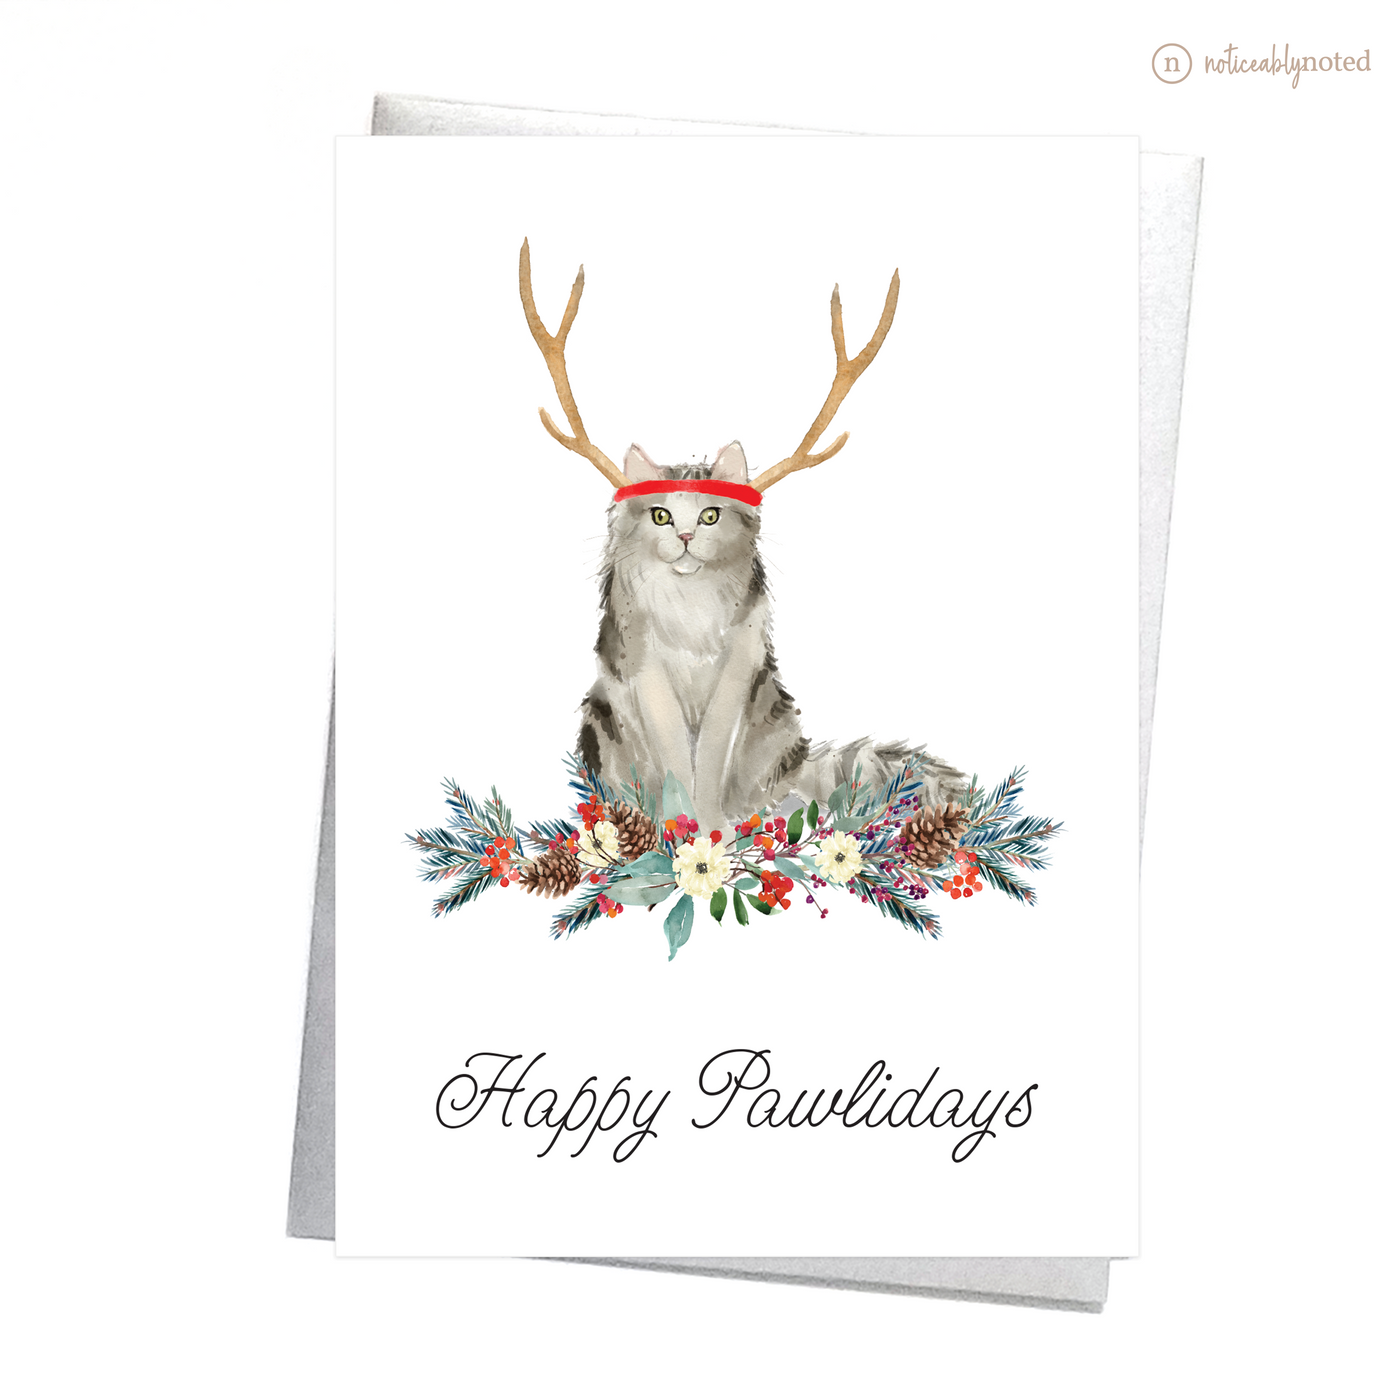 Ragamuffin Holiday Greeting Cards | Noticeably Noted